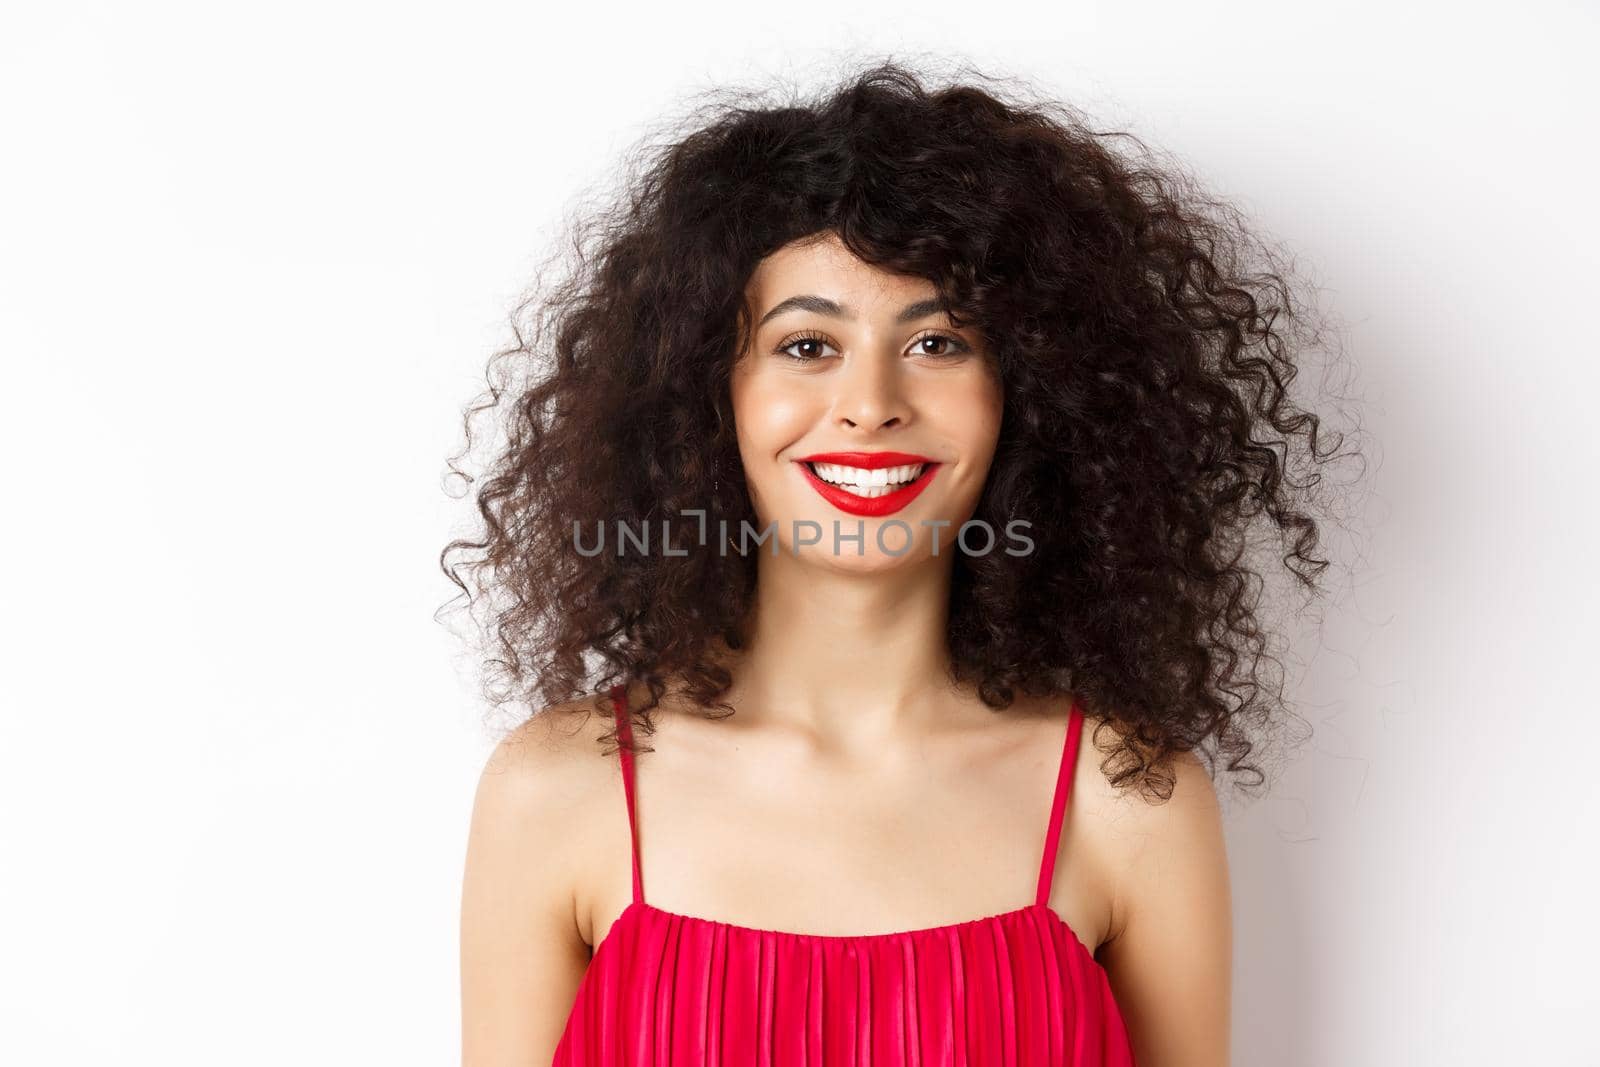 Close-up of beautiful woman with curly hairstyle, wearing red dress and lipstick, smiling happy at camera, white background.